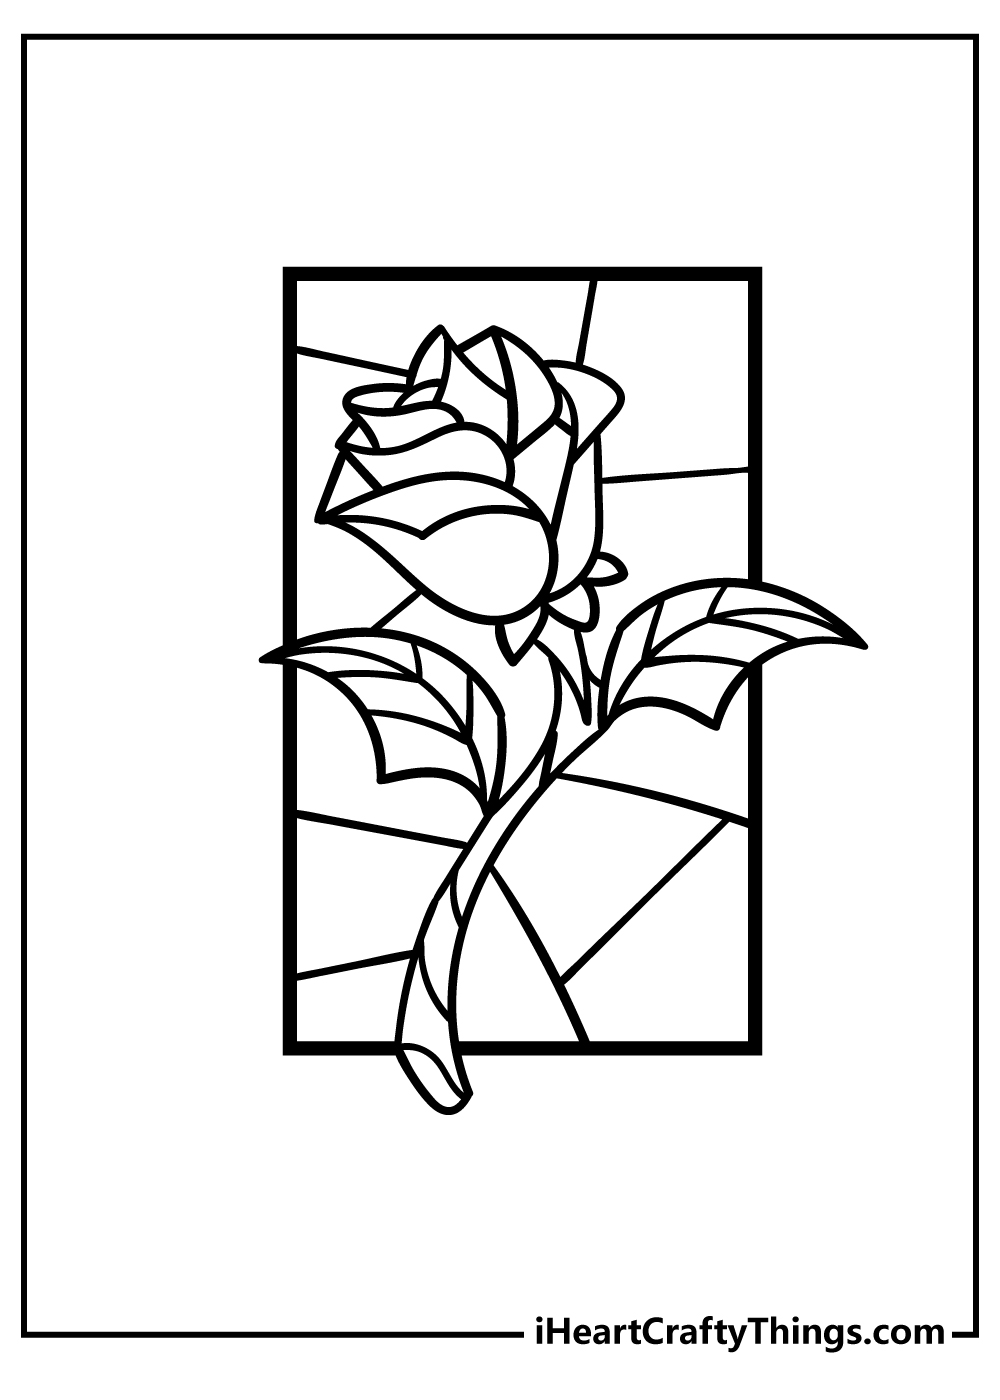 Stained glass pages free printables